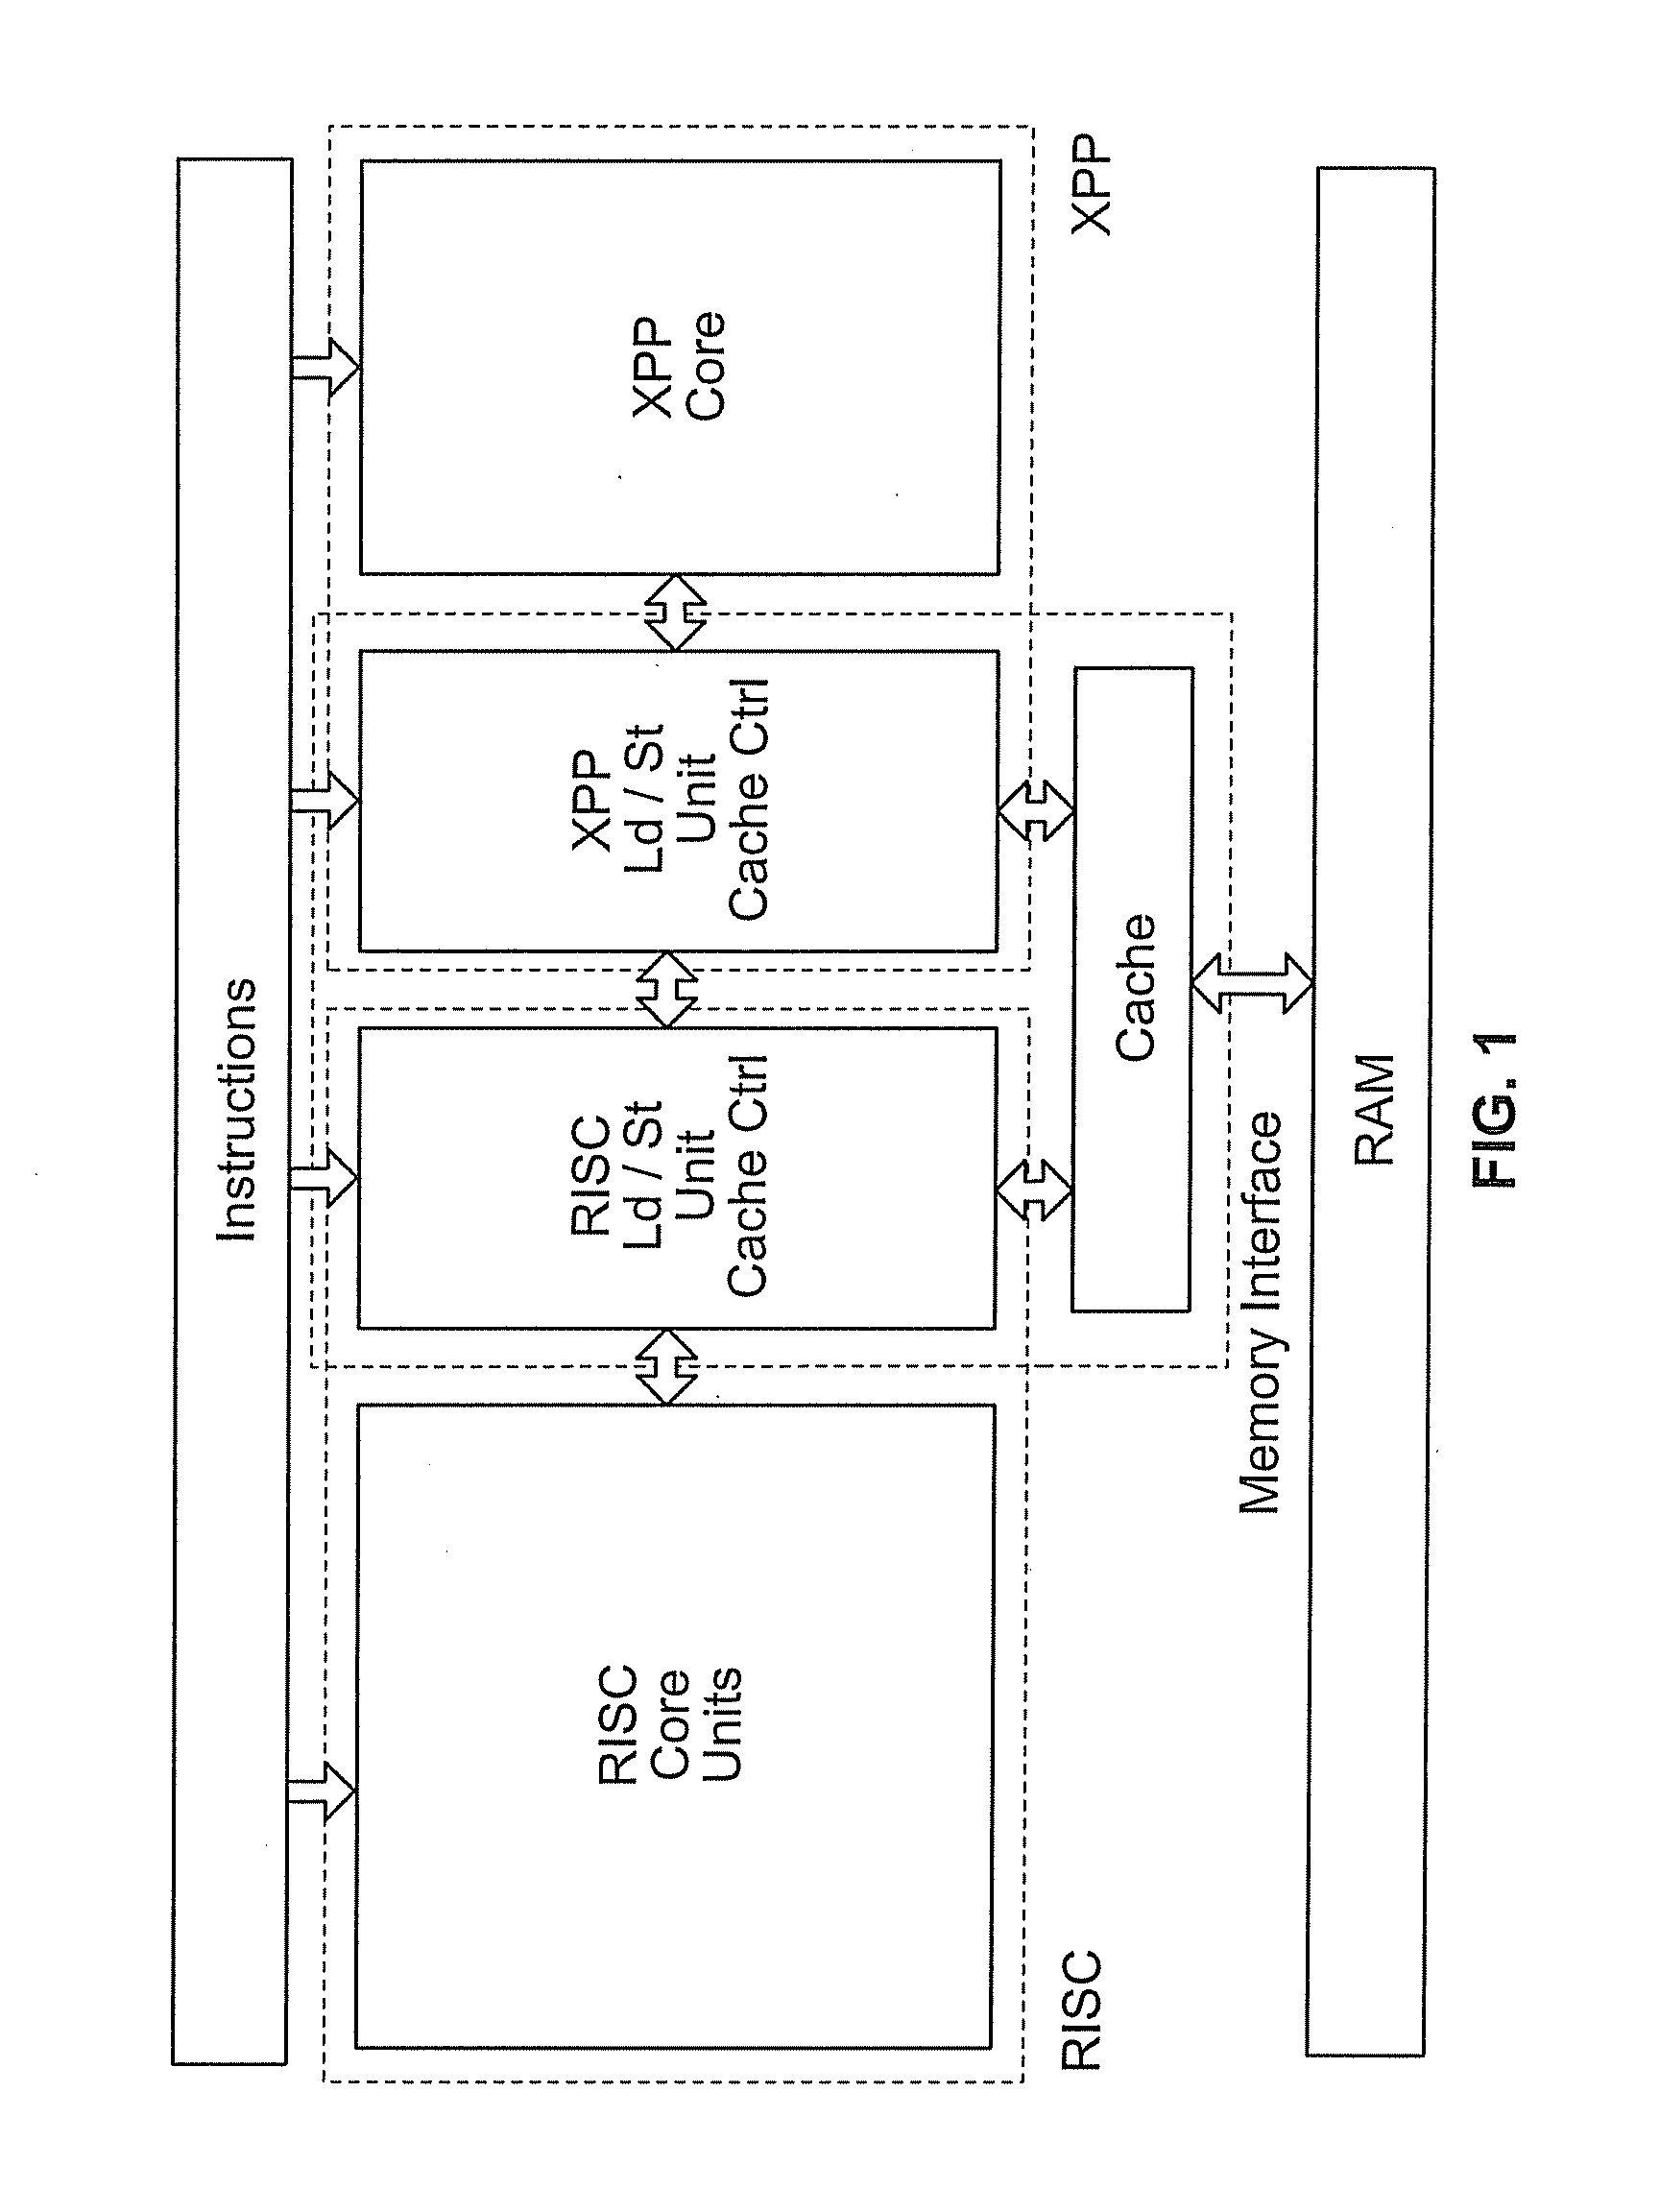 Method and device for coupling a data processing unit and a data processing array